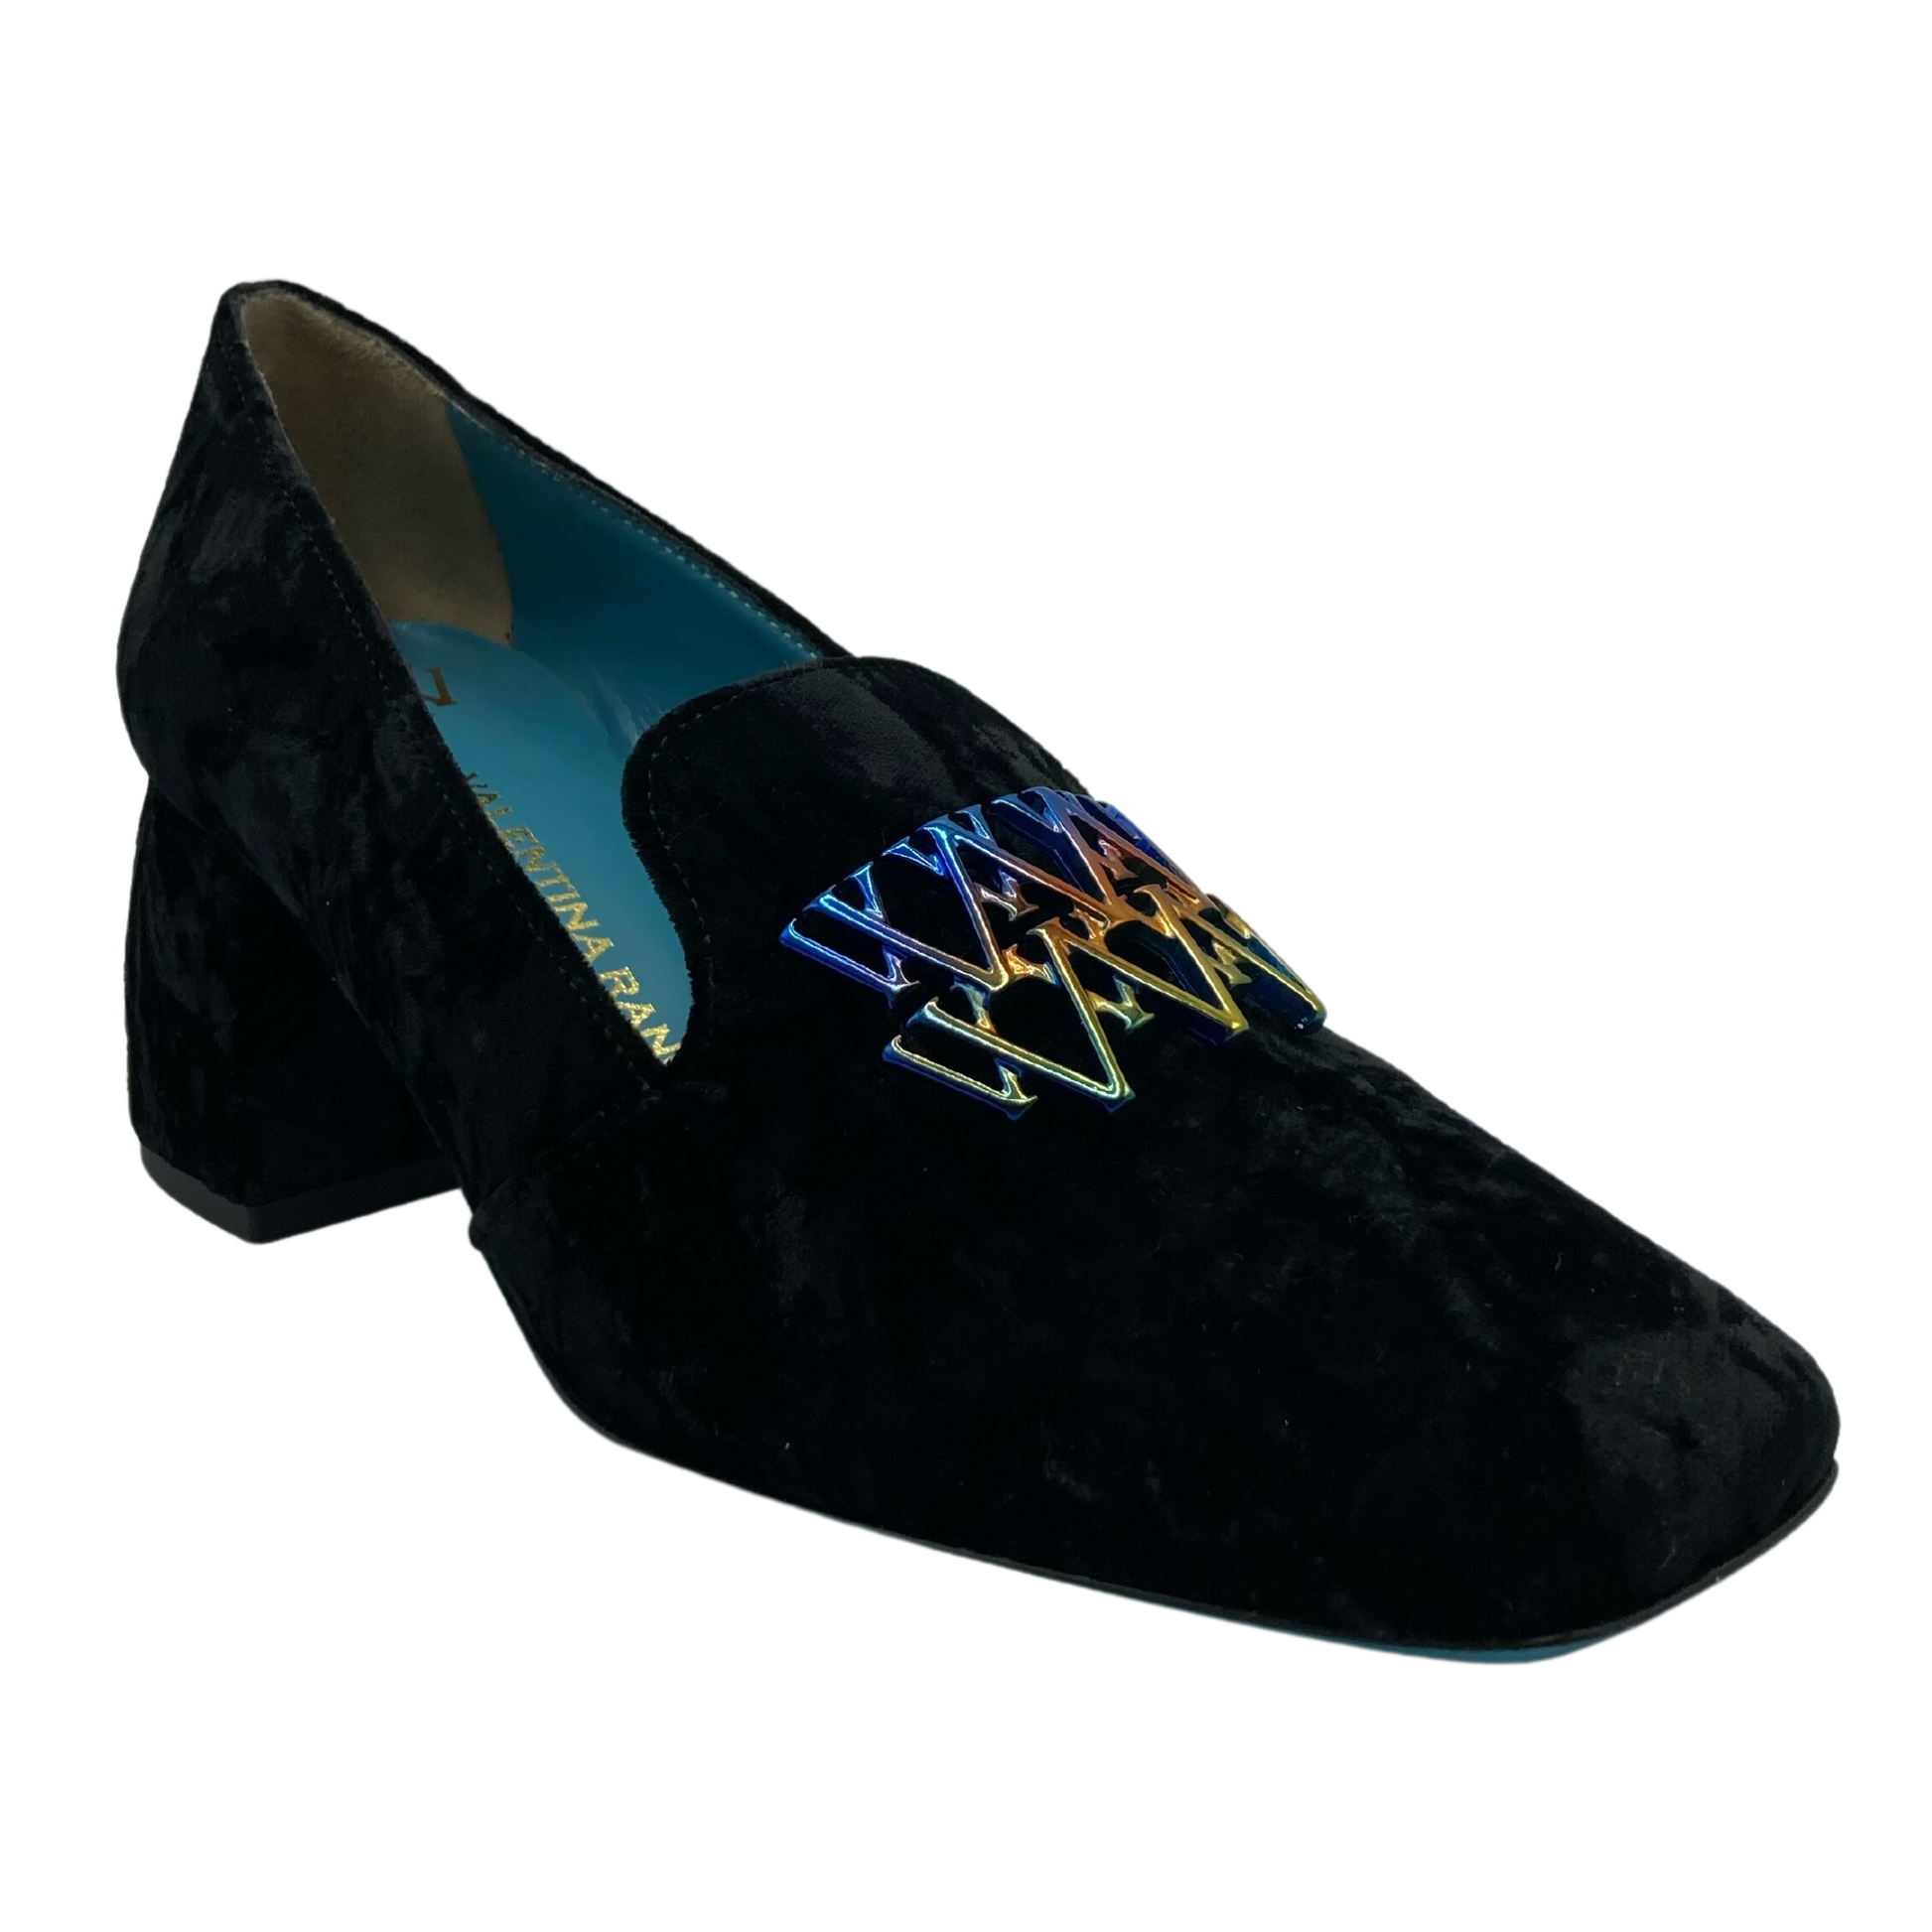 45 degree angled view of black suede loafer with multicoloured detail on upper and suede block heel